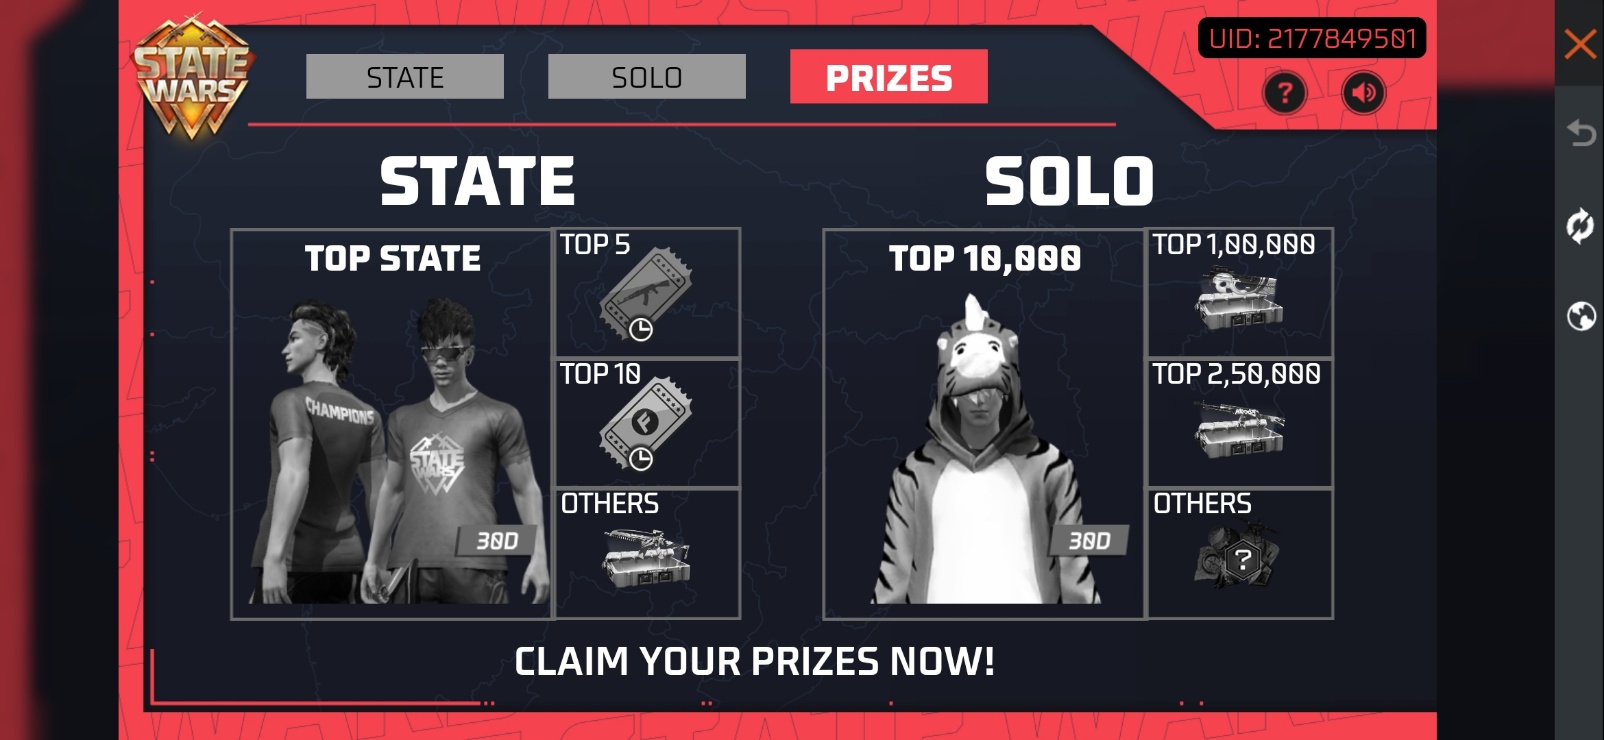 How to get state wars free rewards in free fire Max